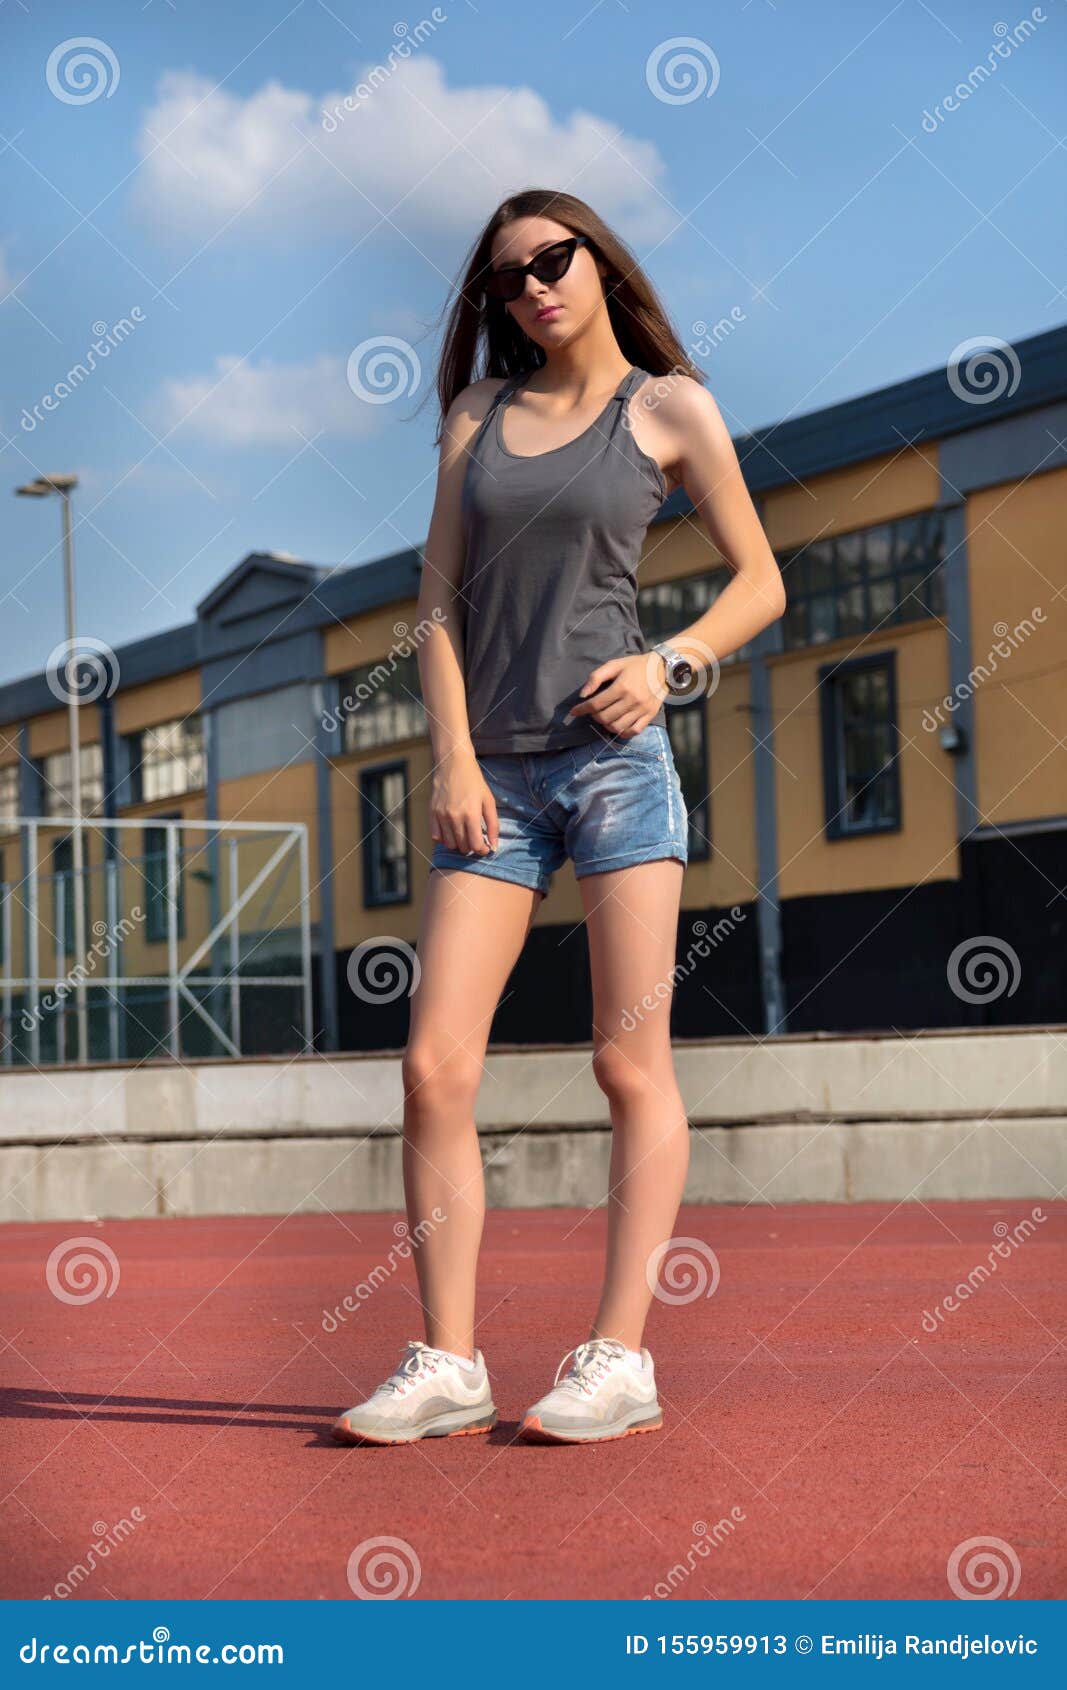 grow up Of storm pronunciation Girl in Shorts with Long Legs and Summer Clothes Posing on the Playground  Stock Image - Image of focus, hair: 155959913